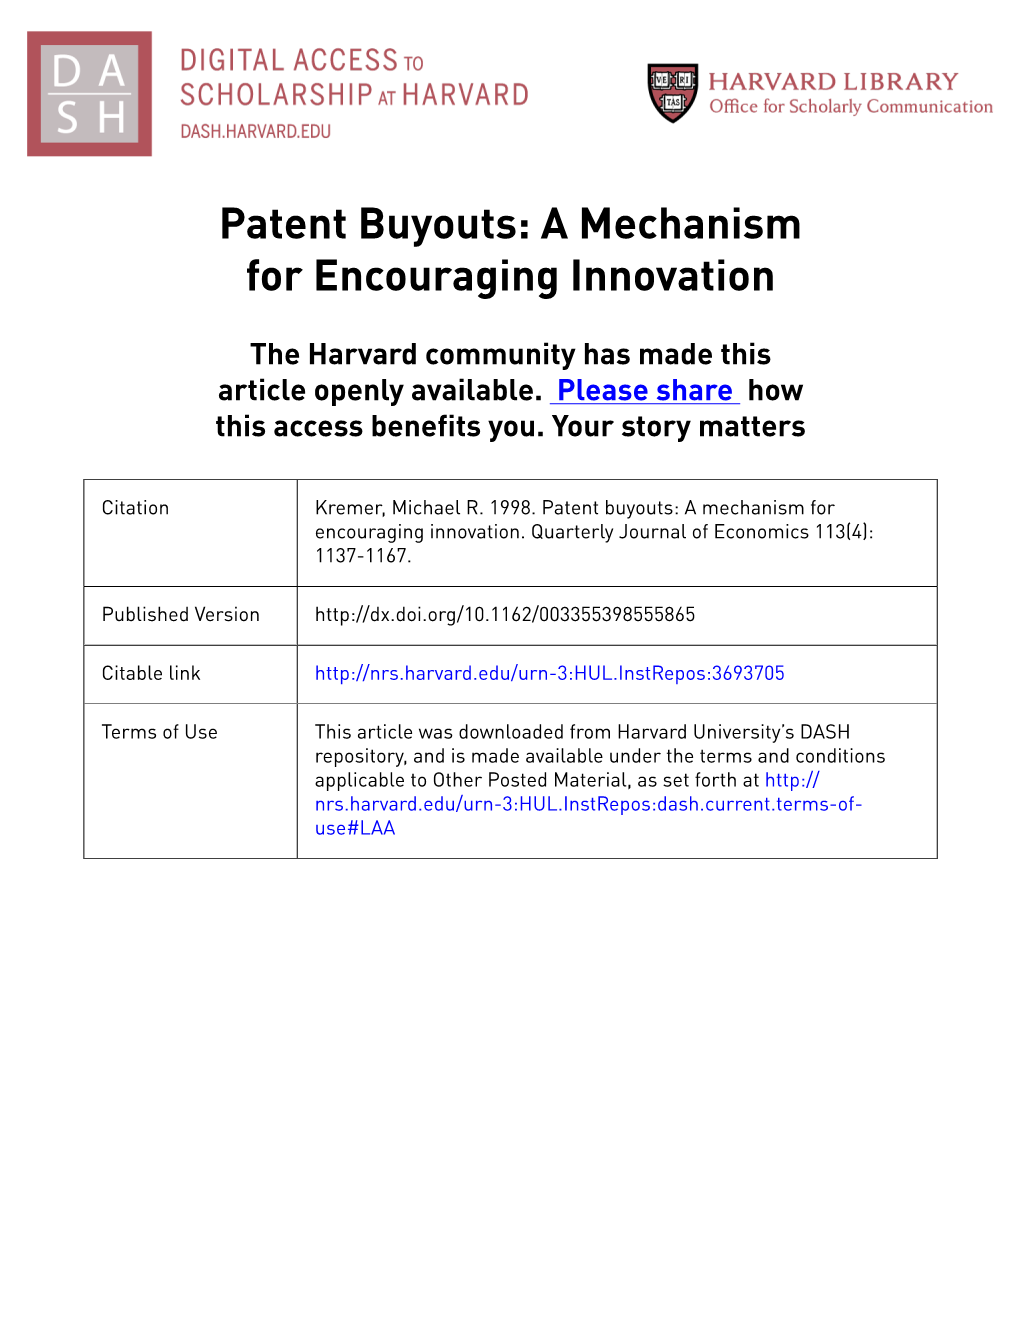 Patent Buyouts: a Mechanism for Encouraging Innovation